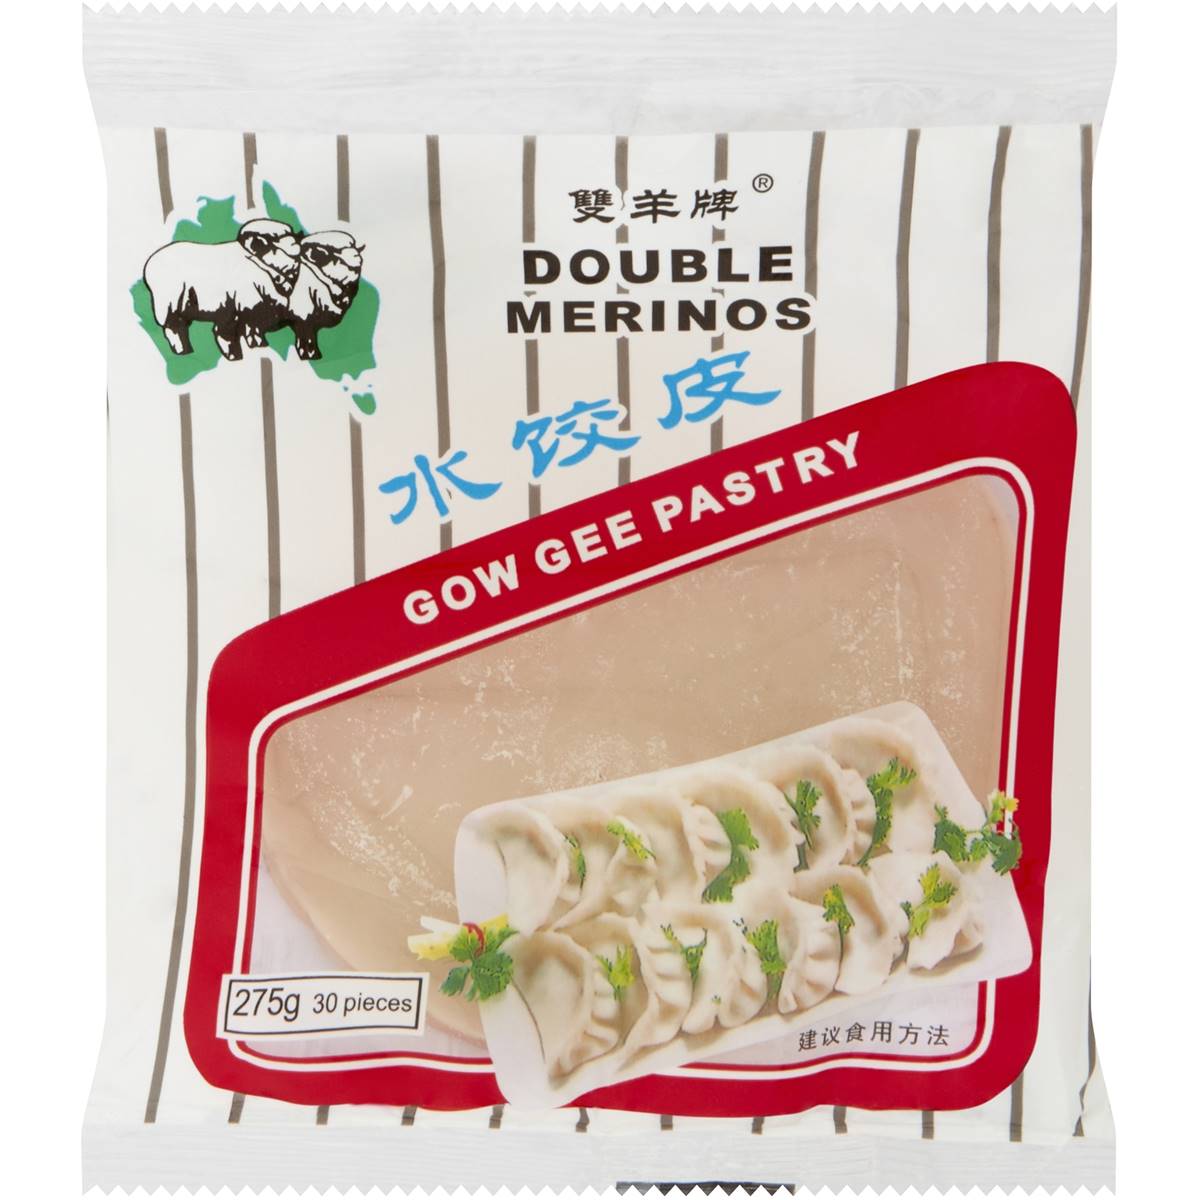 Double Merino Pastry Gow Gee 275g | Woolworths